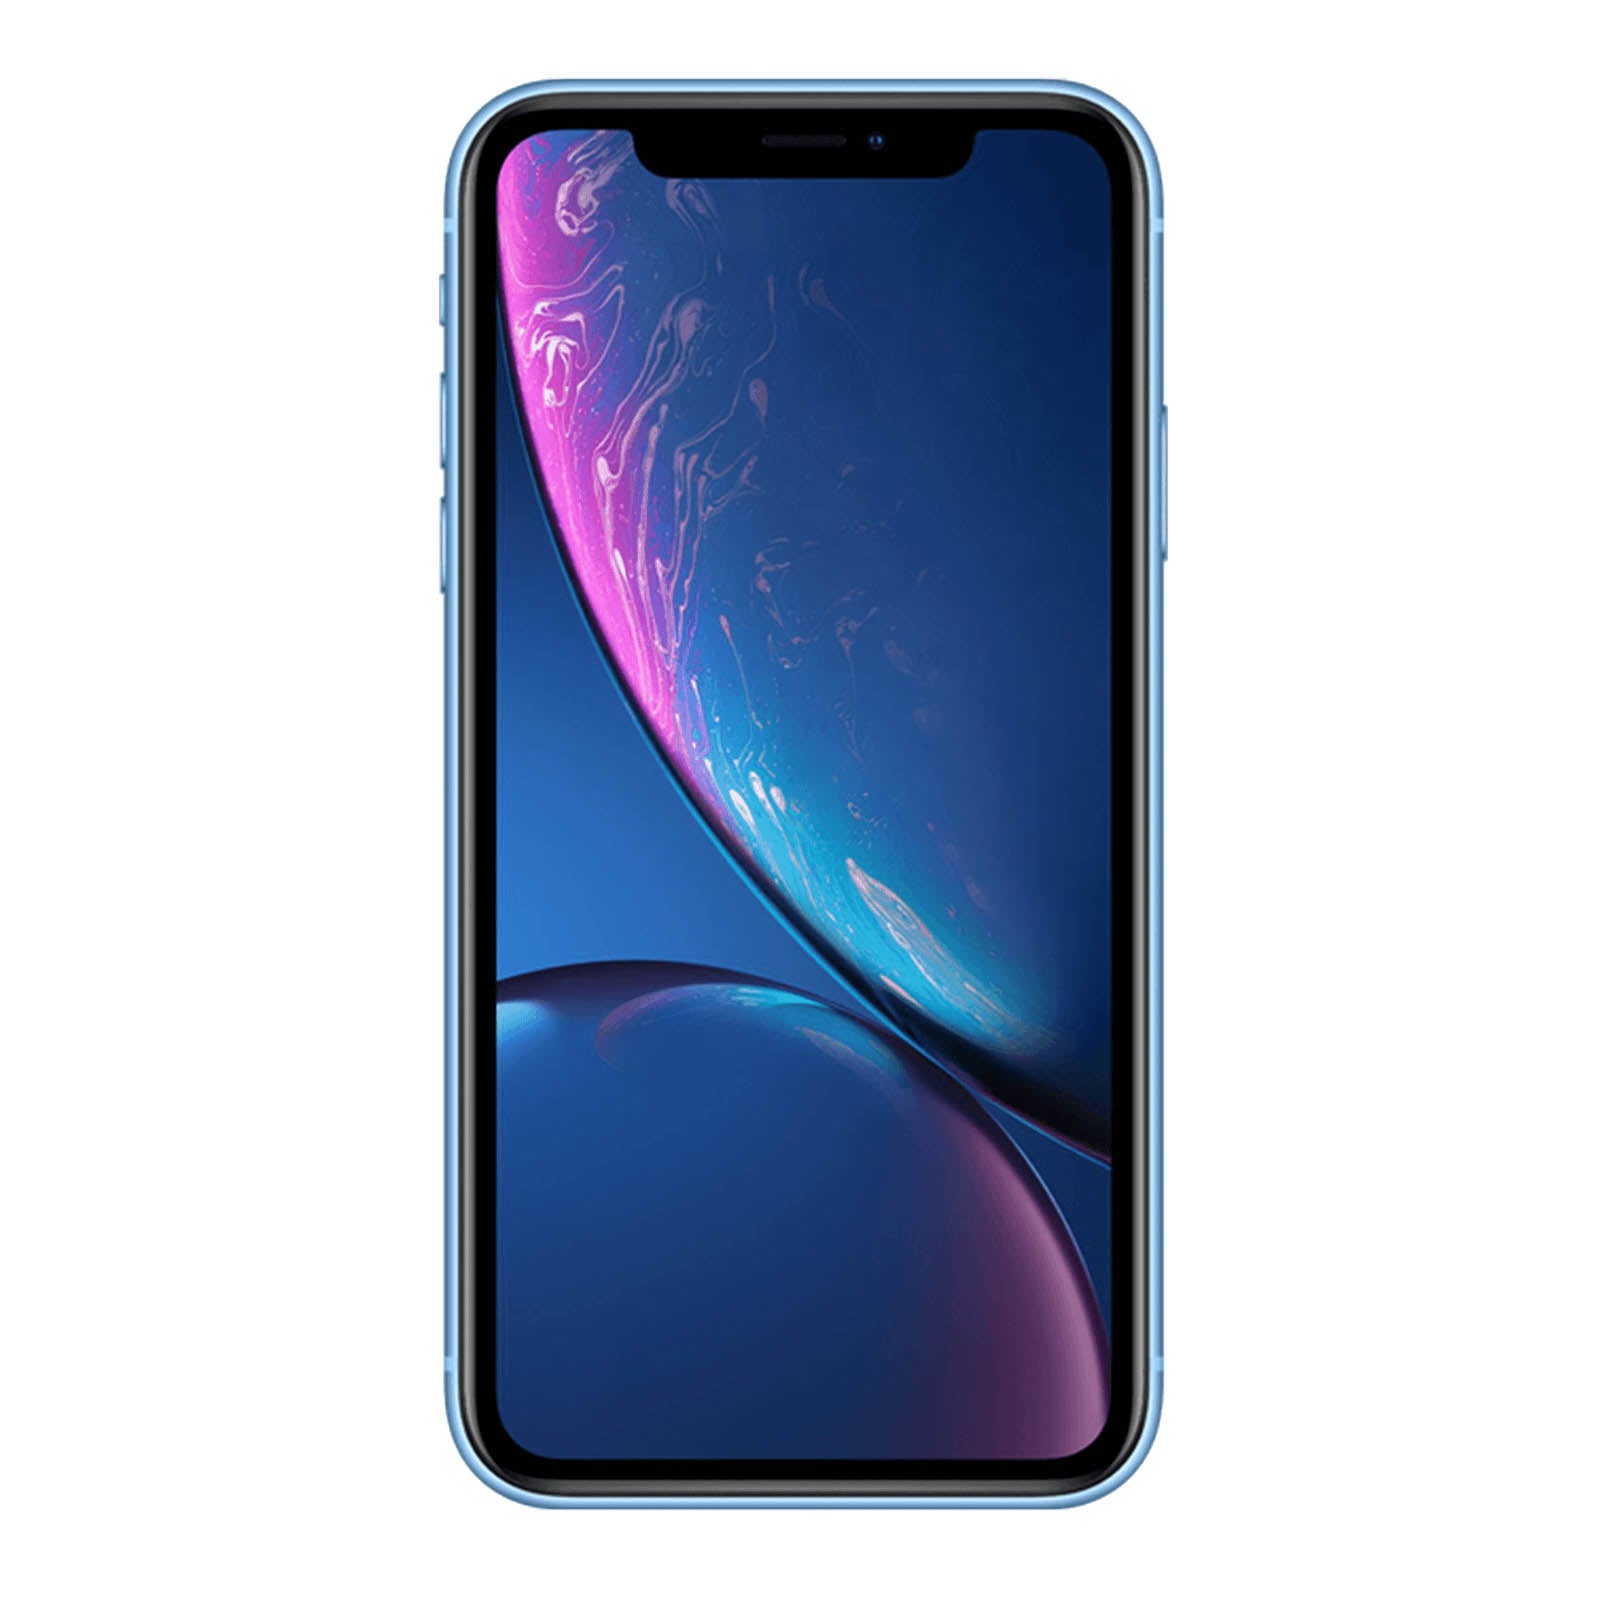 Apple iPhone XR 128GB Blue Very Good - T-Mobile